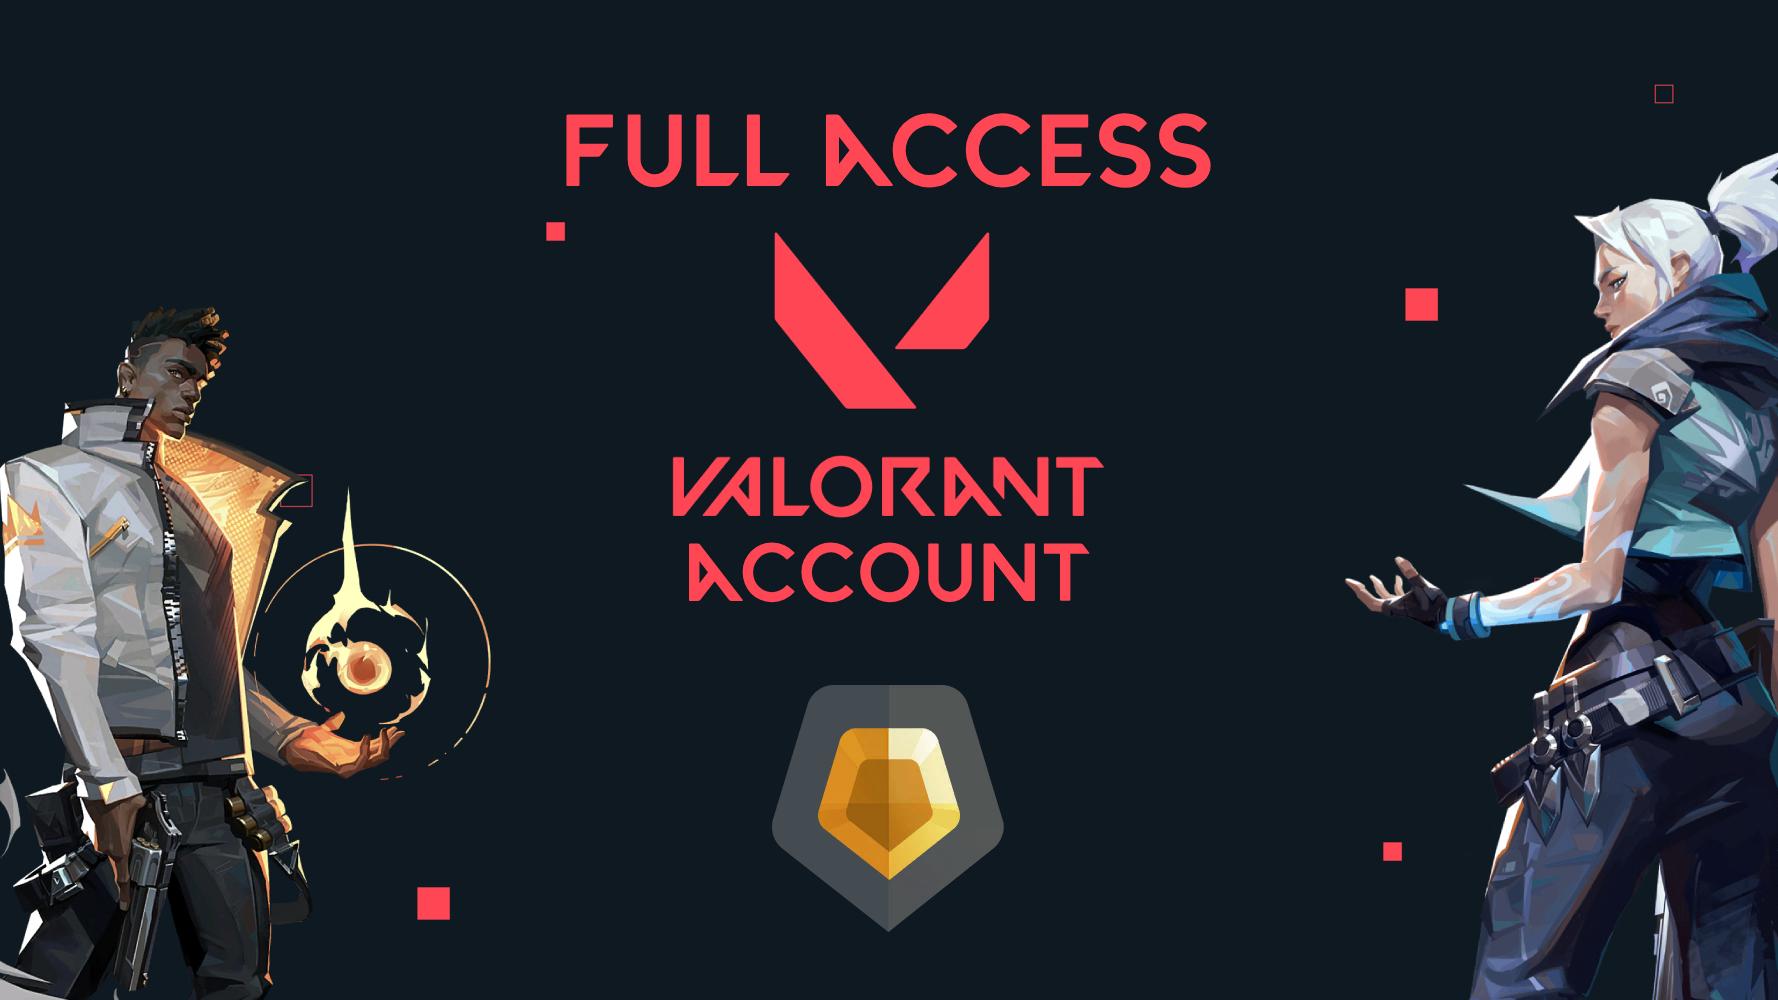 ⭐[LAN/LAS/LATAM] ☑️ GOLD (expired) RANK ✔️ Full access + Email changeable ✔️ Fast Delivery 24/7 ⭐